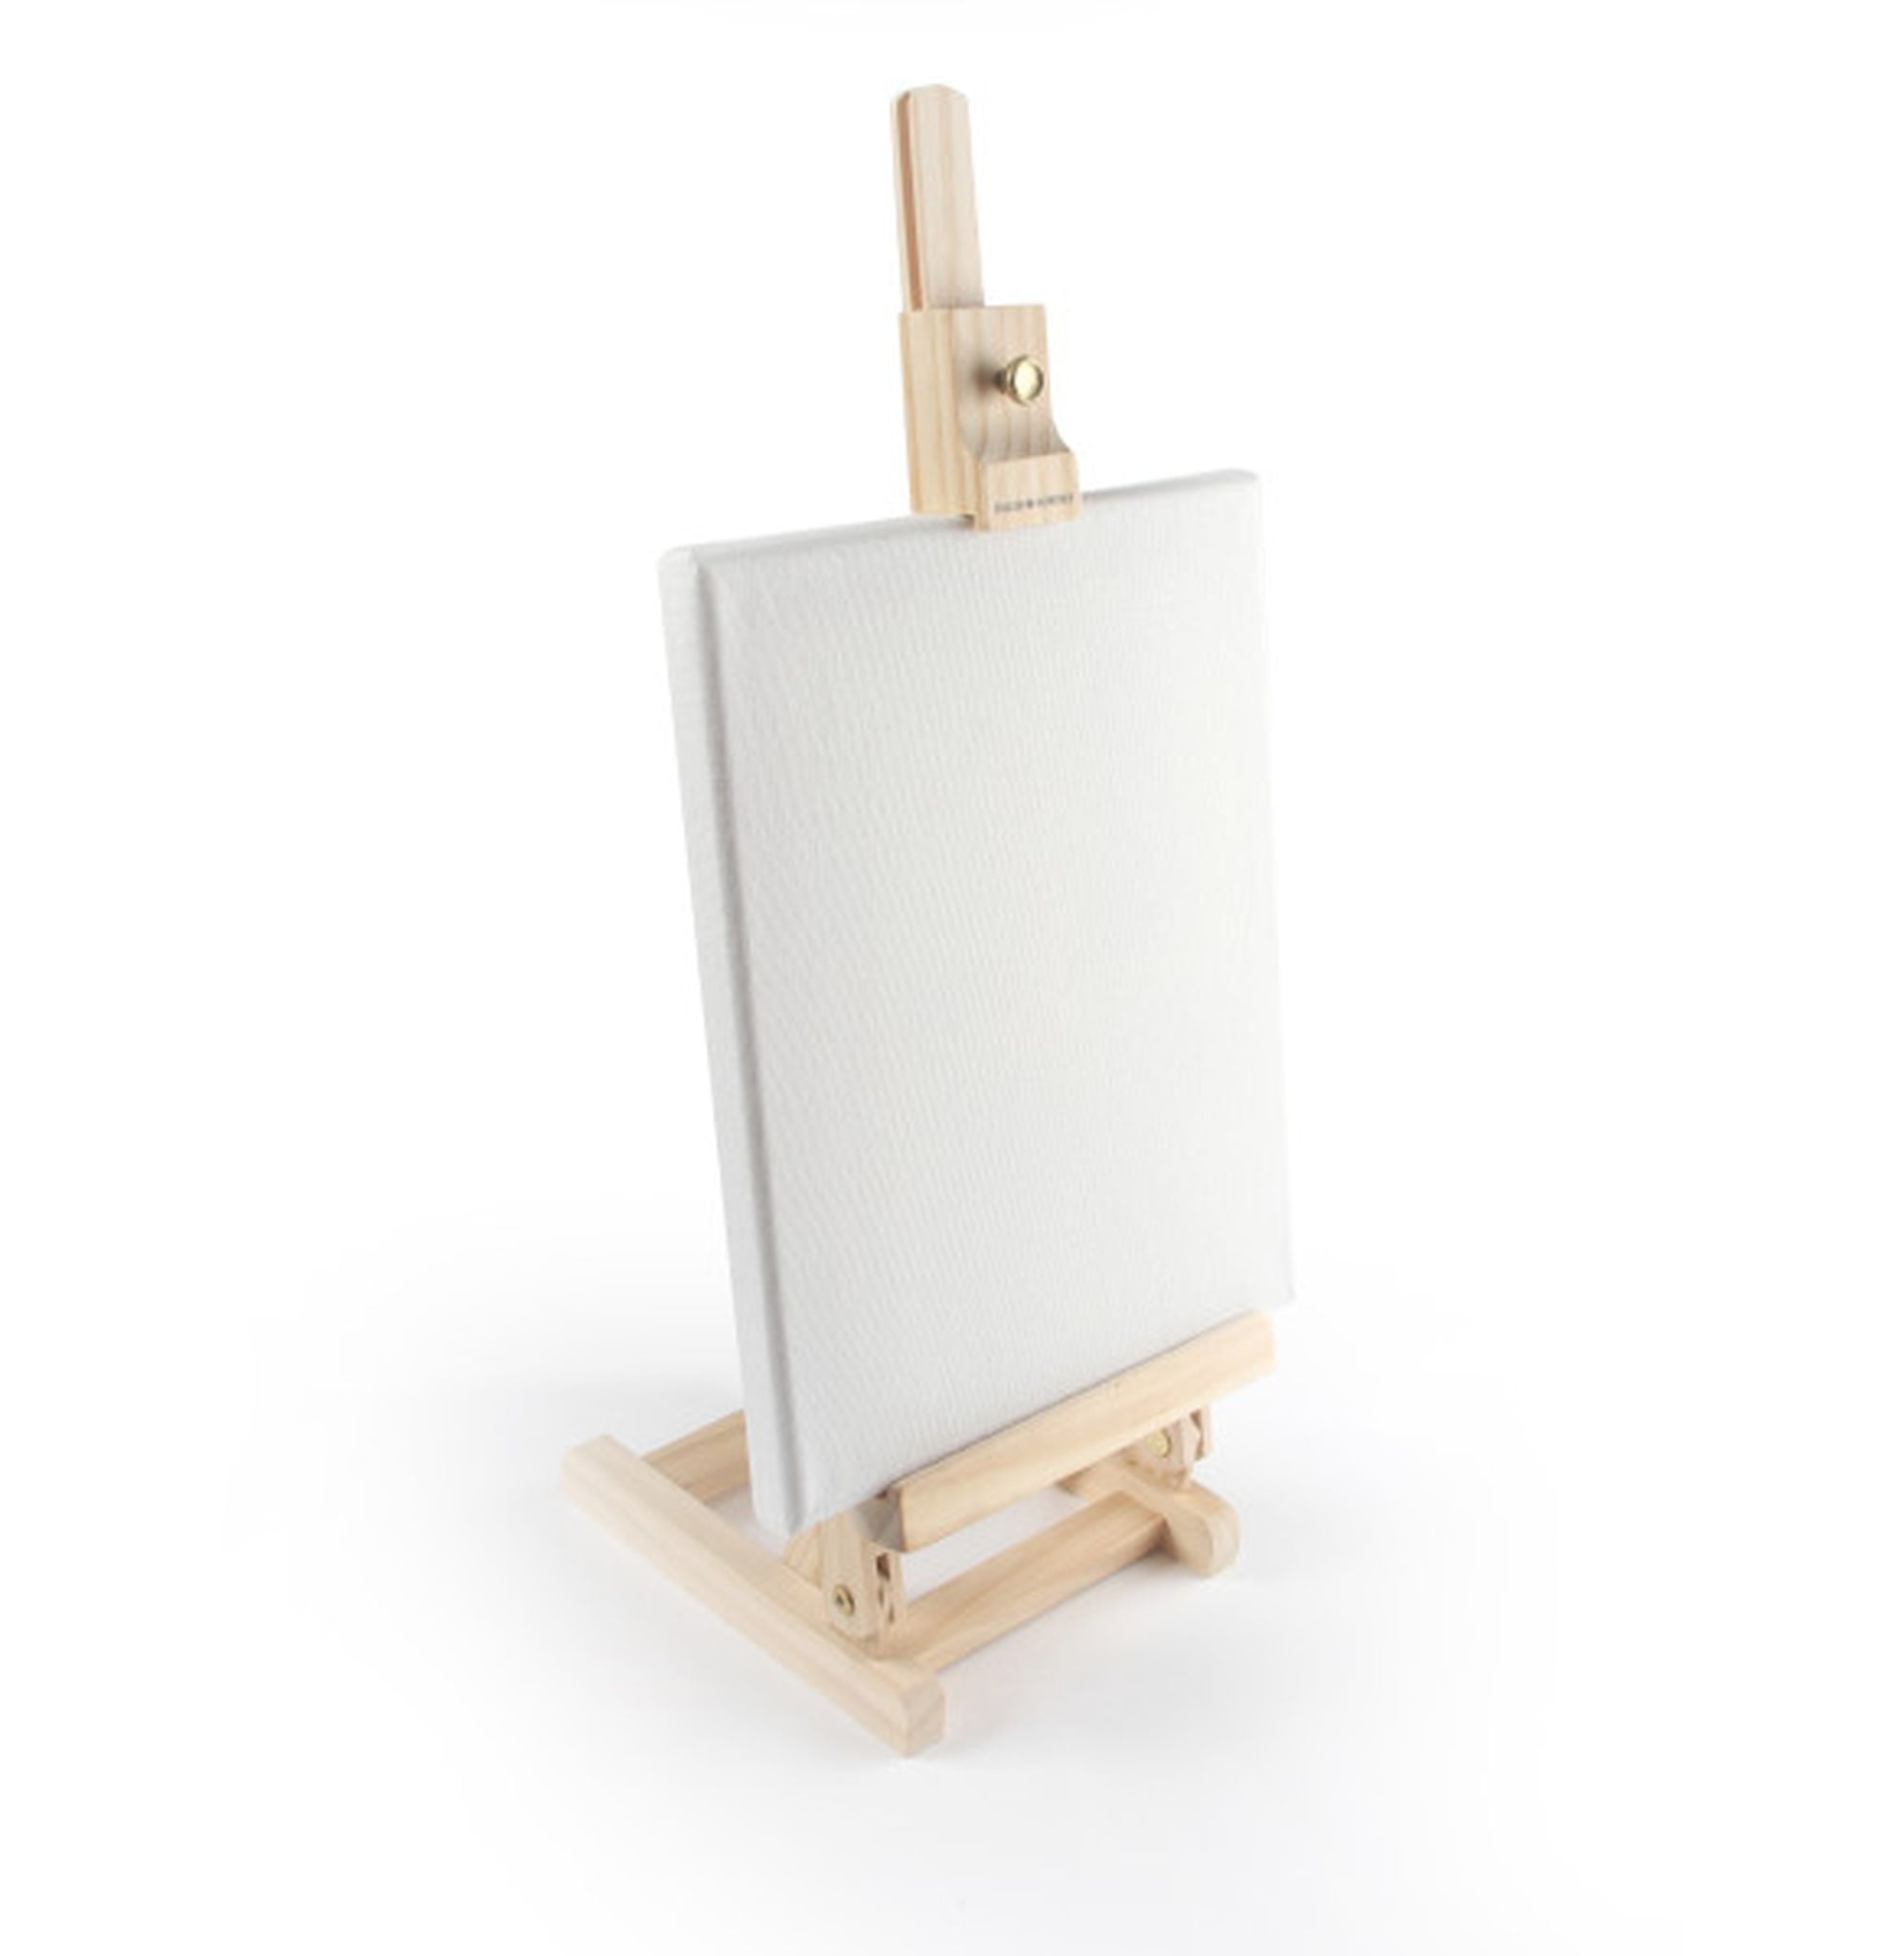 Daler Rowney Wooden Easel Painting Canvas Stand For Painting